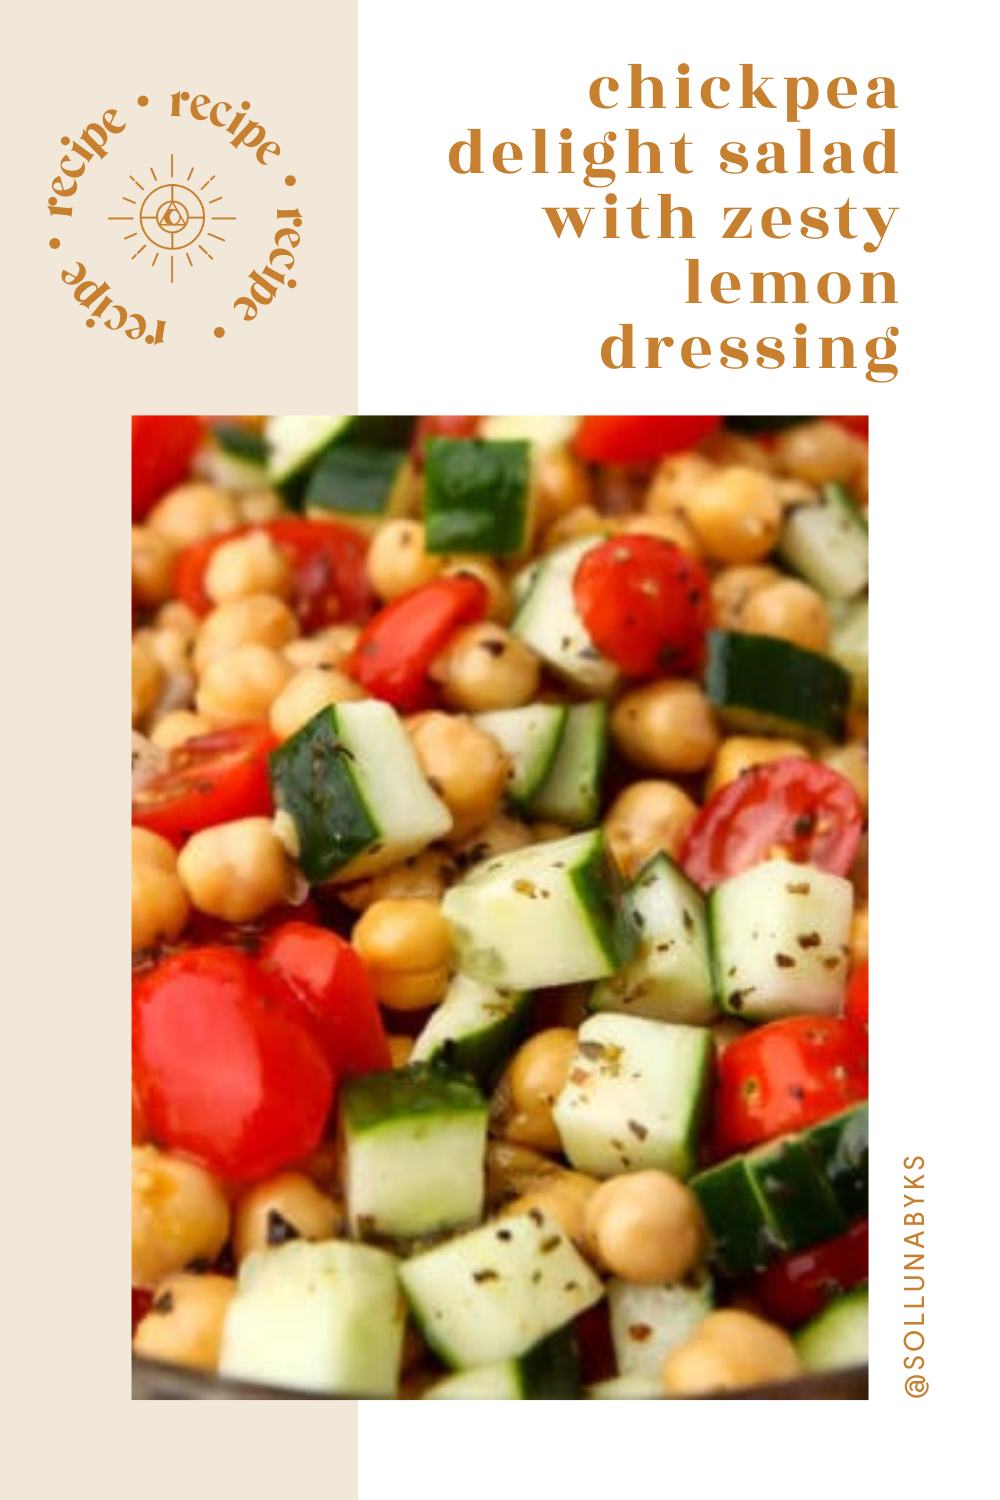 A close-up of Kimberly Snyder's chickpea delight salad with zesty lemon dressing.